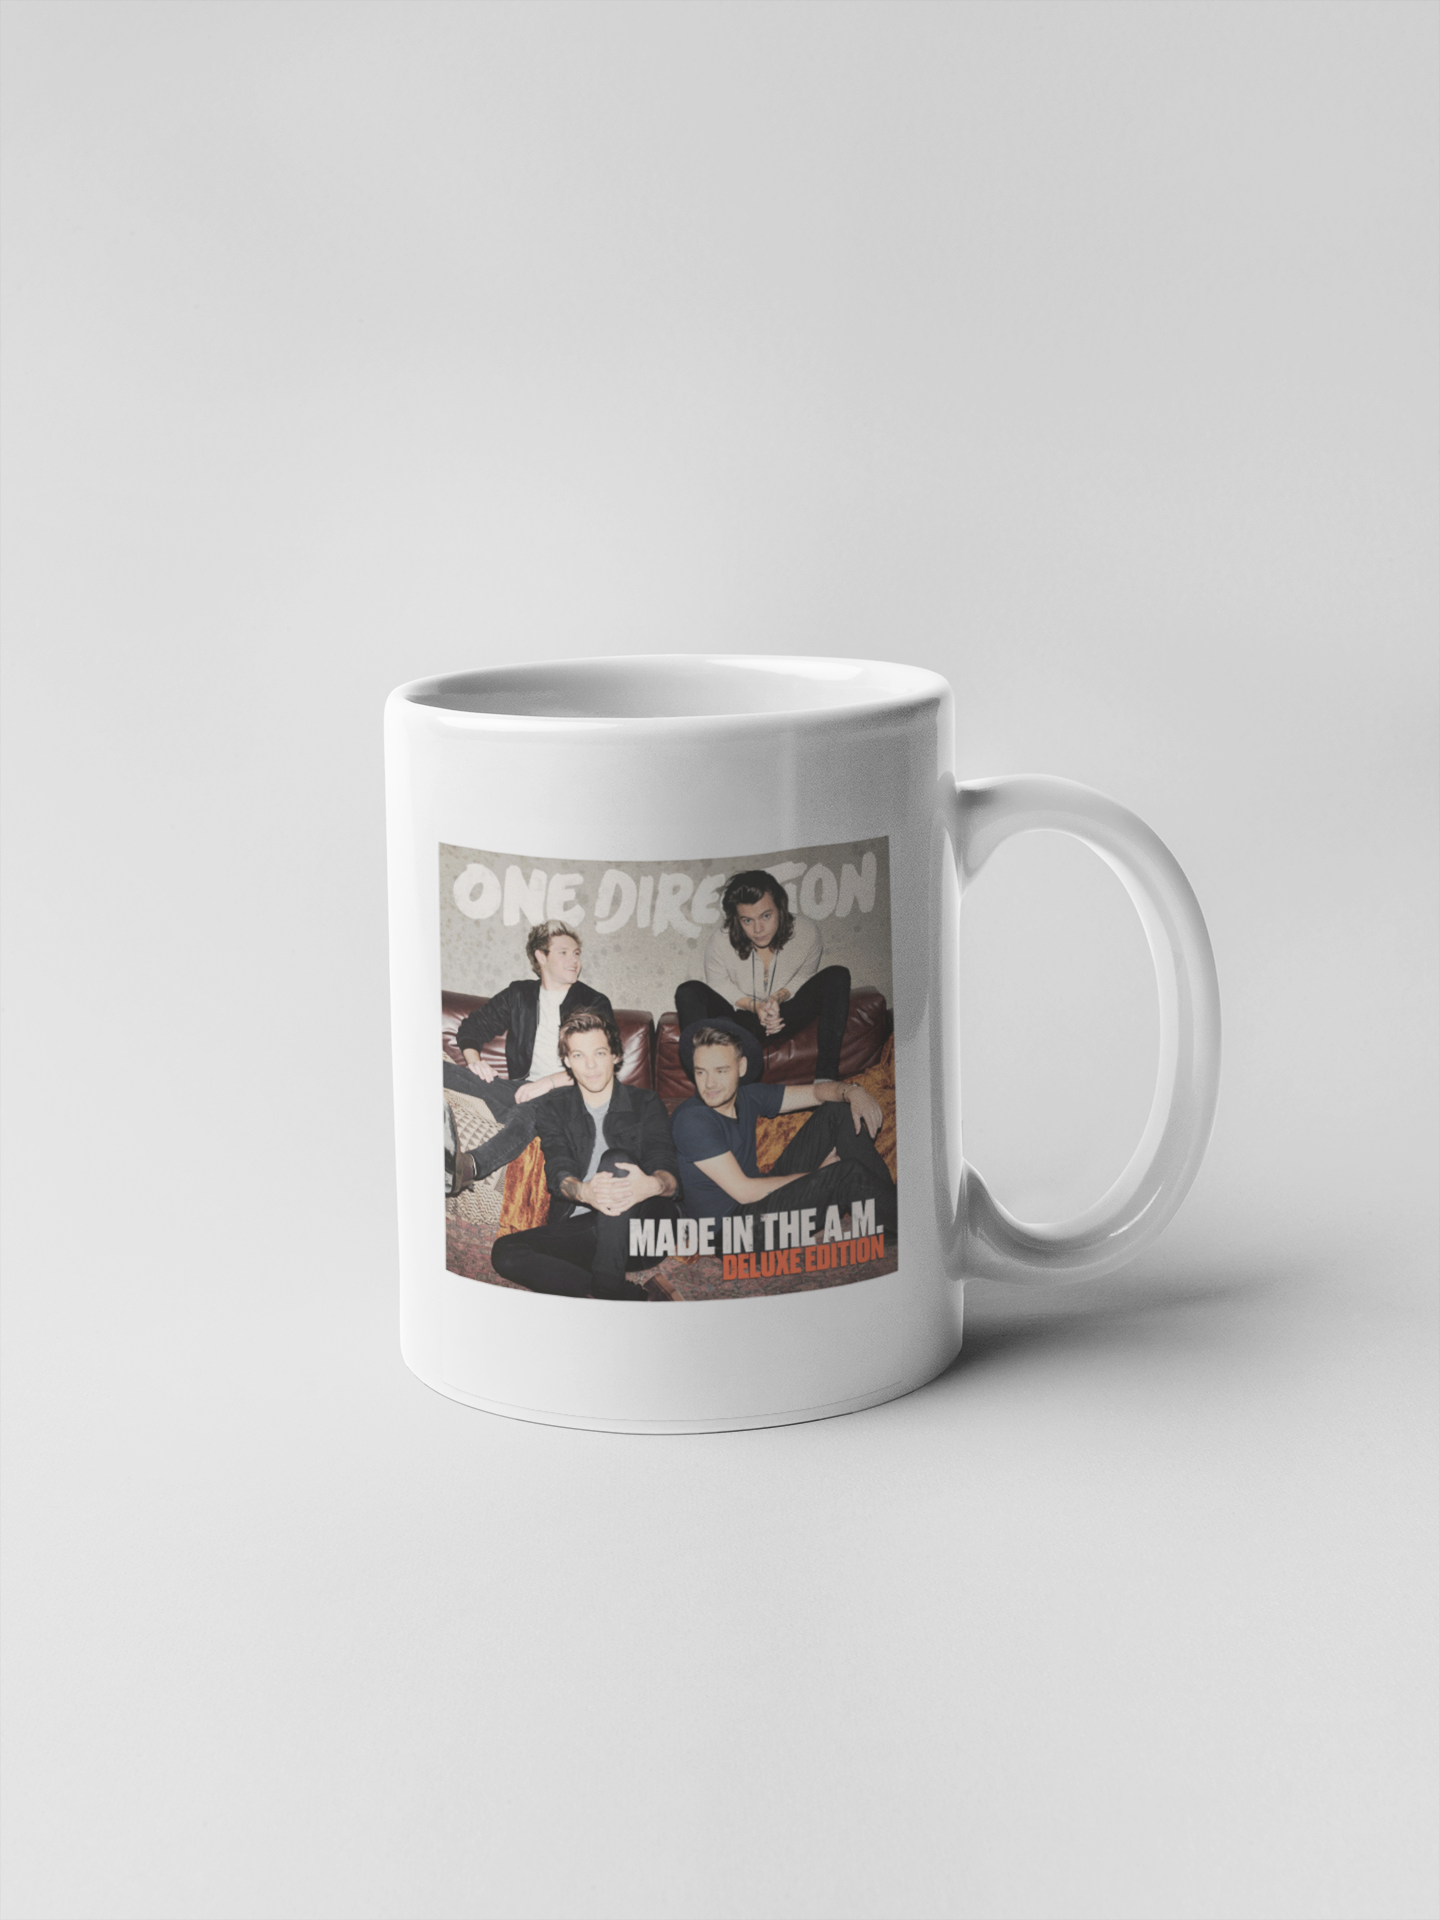 One Direction Made in The A M Ceramic Coffee Mugs